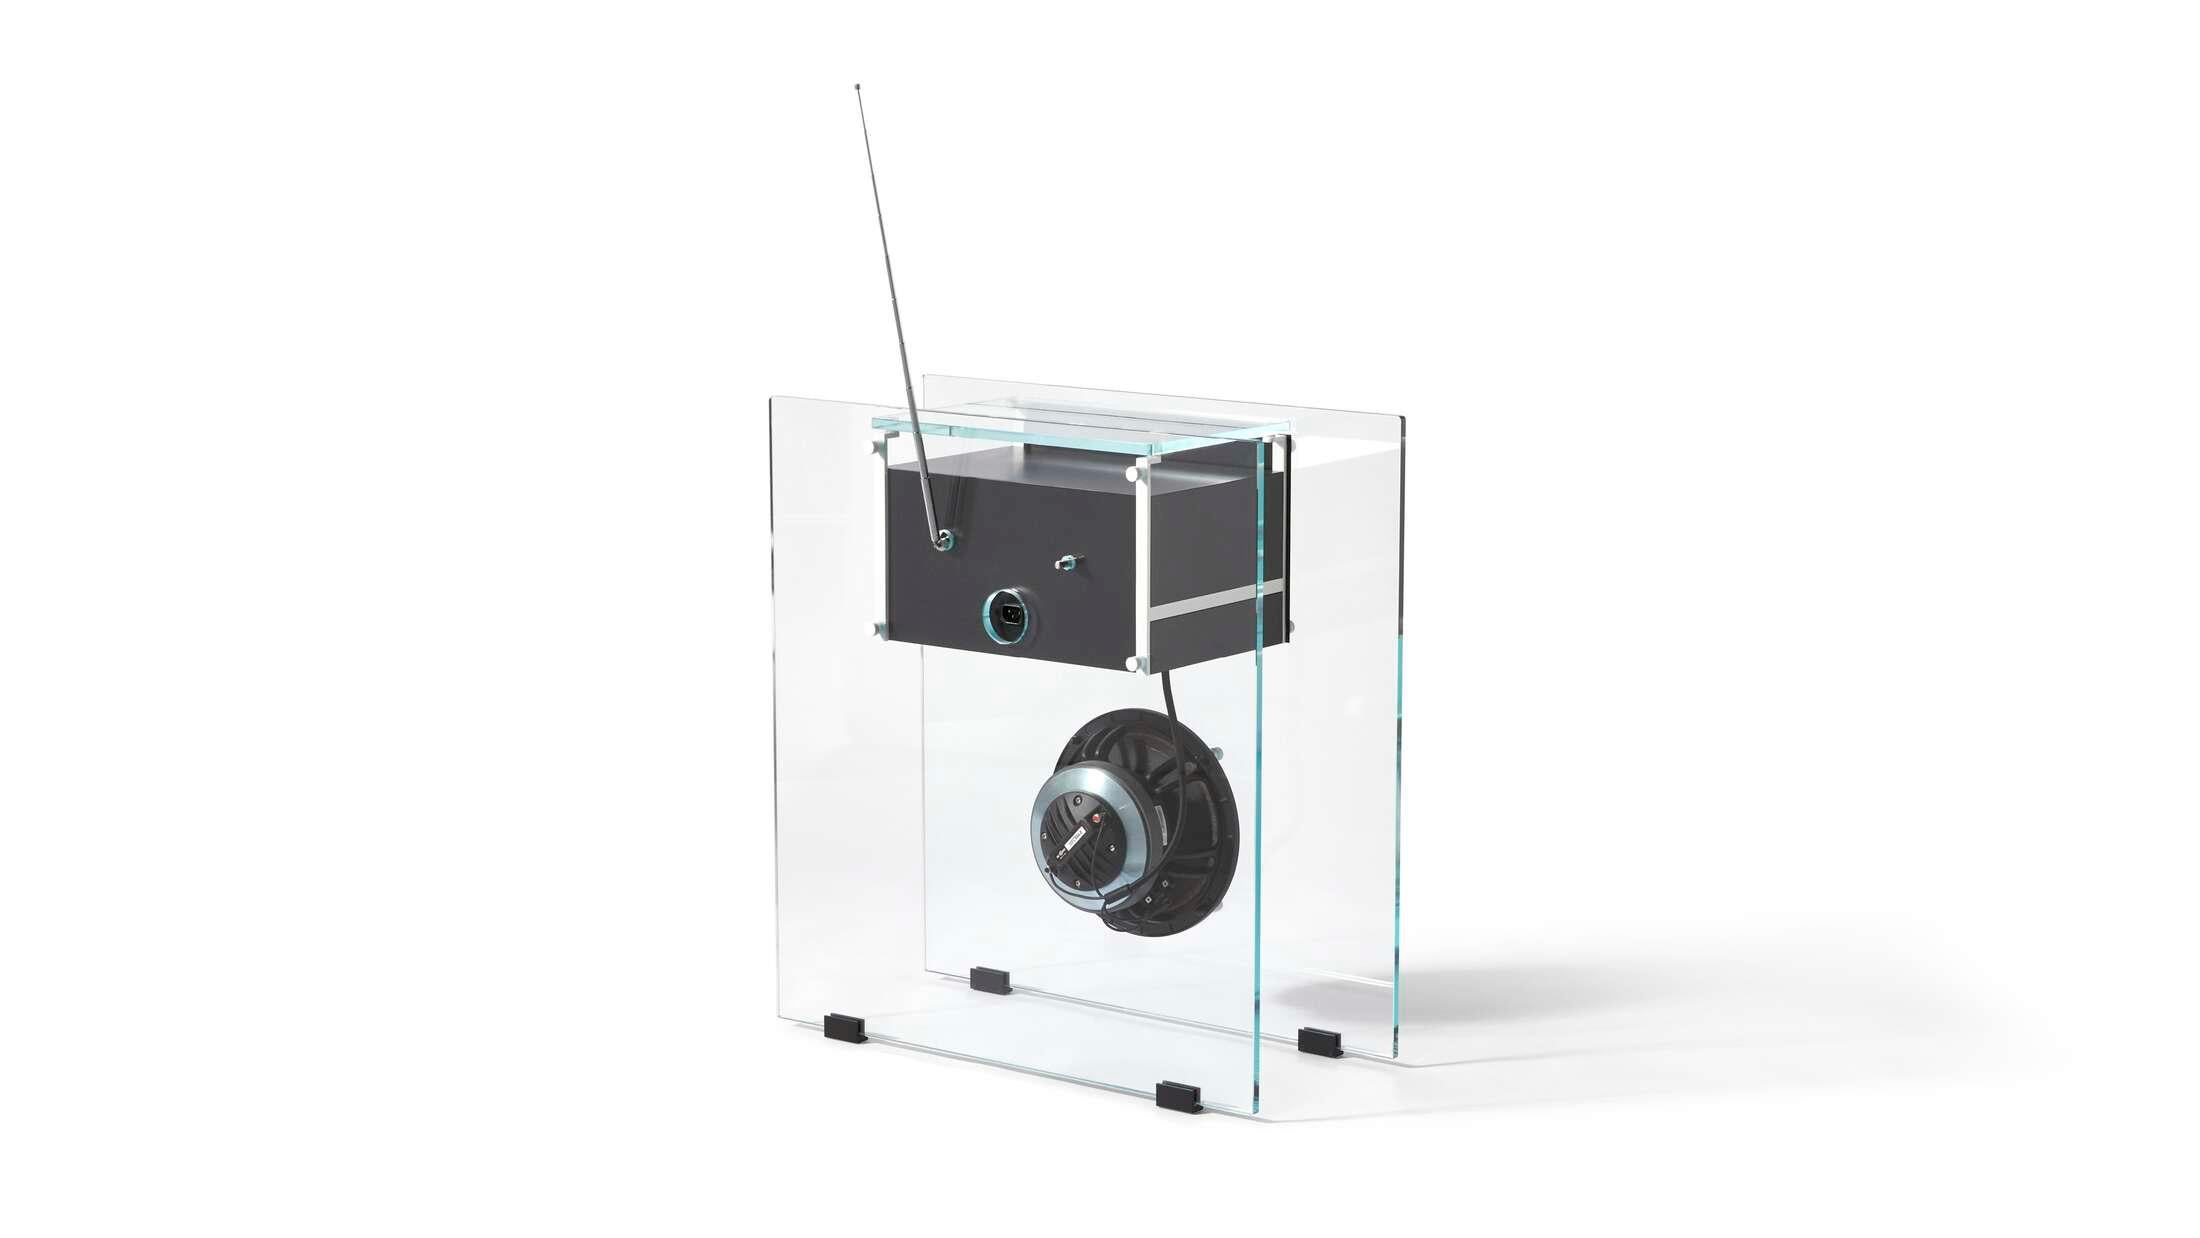 please note: 842 subwoofer wireless for clearglass-radio is currently not available. Radio is available separately though. 

Radio in Cristallo station by Franco Albini in 1938. Relaunched in 2021. Manufactured by Cassina in Italy. Radio in